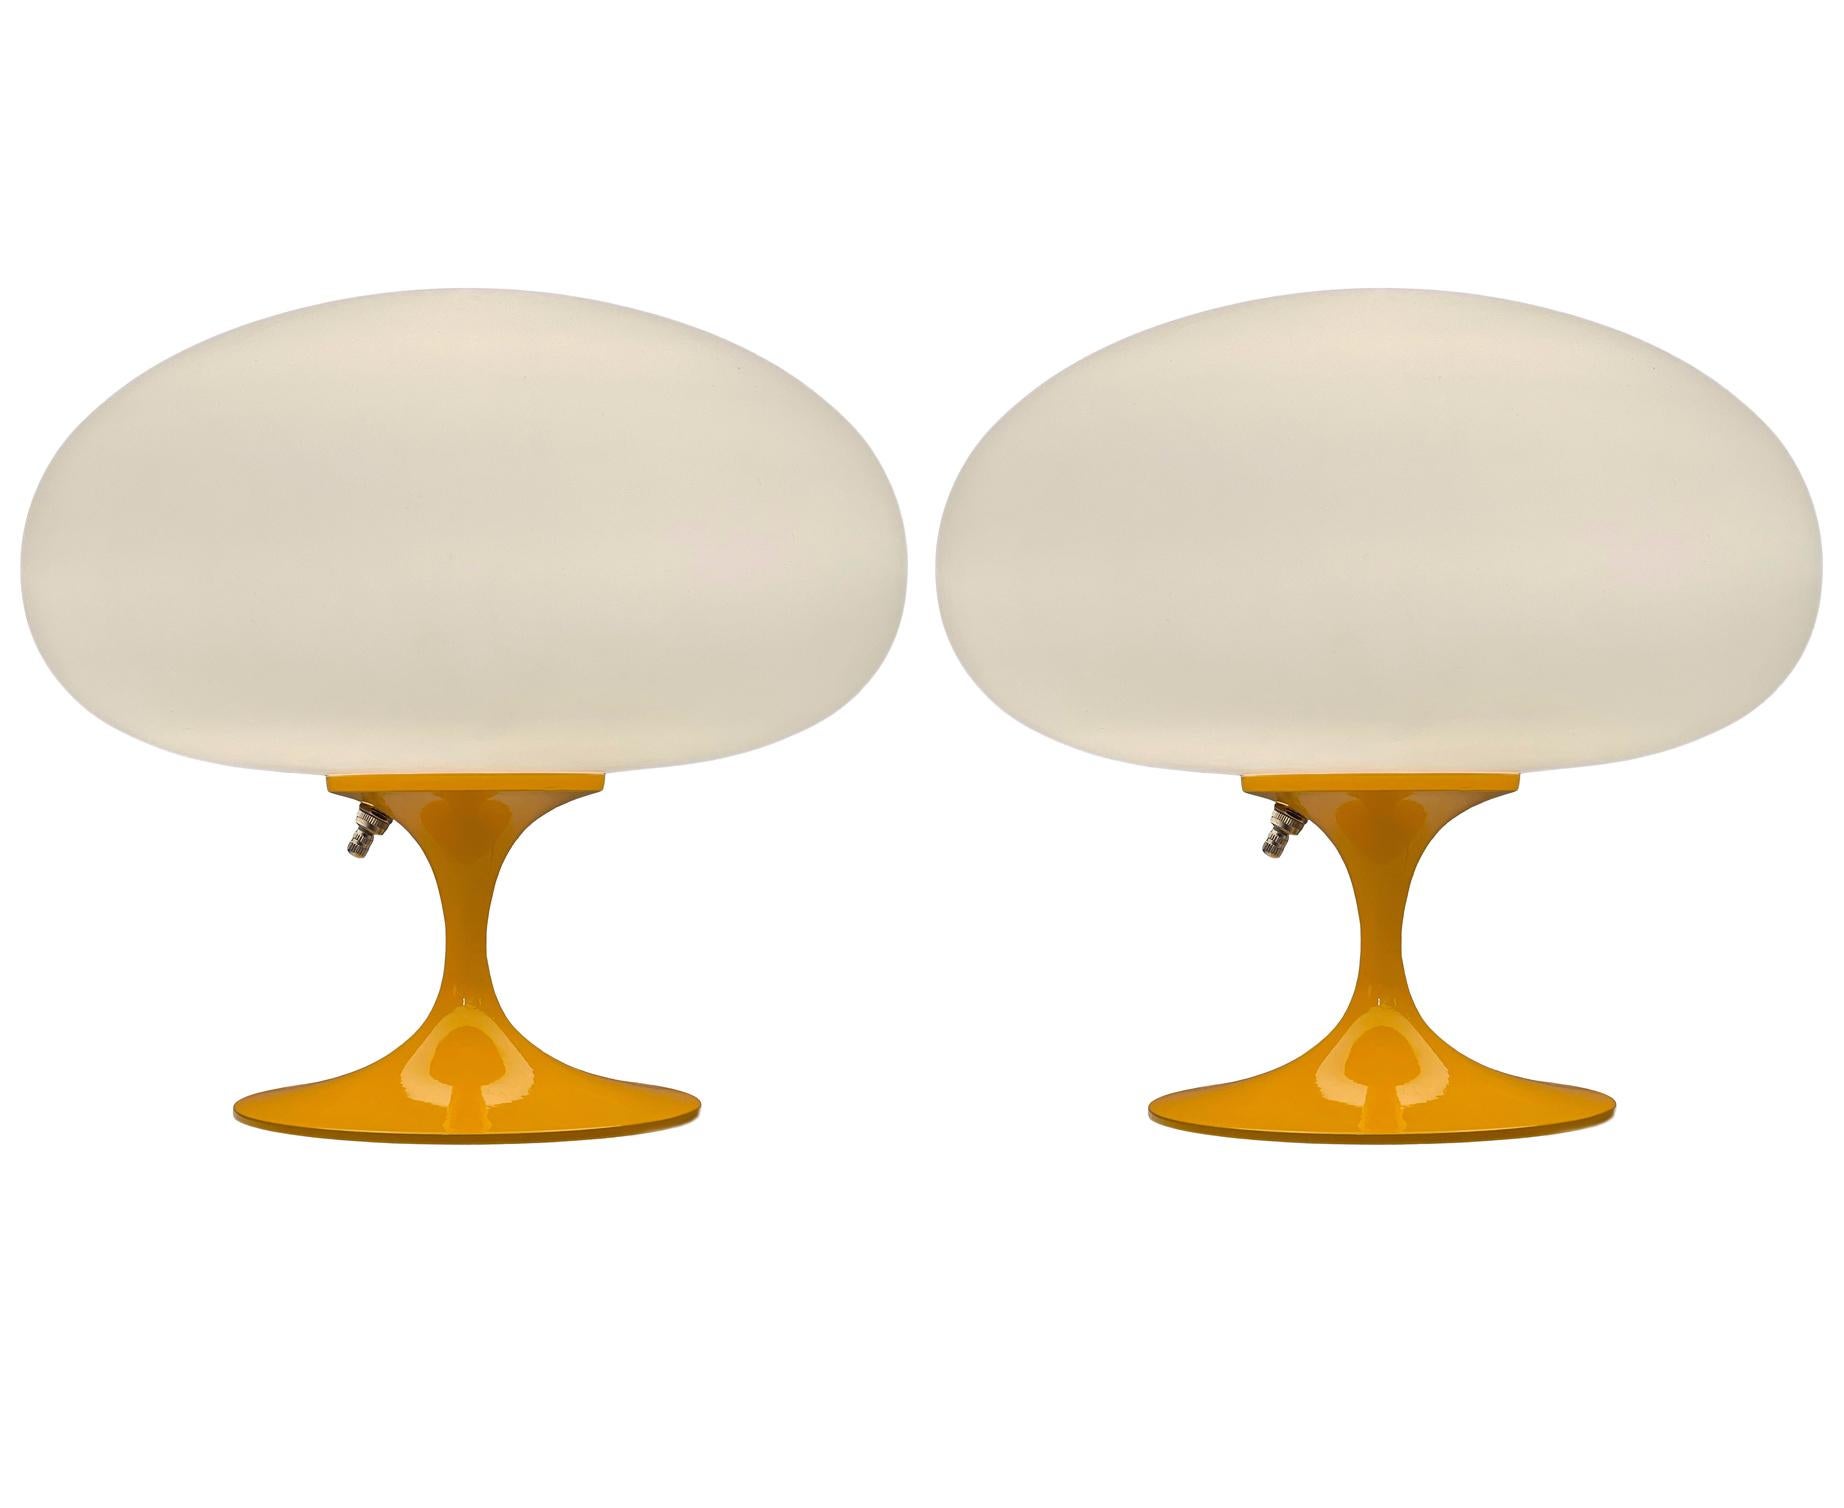 Mid-Century Modern Pair of Mid-Century Tulip Table Lamps by Designline in Orange on White Glass For Sale